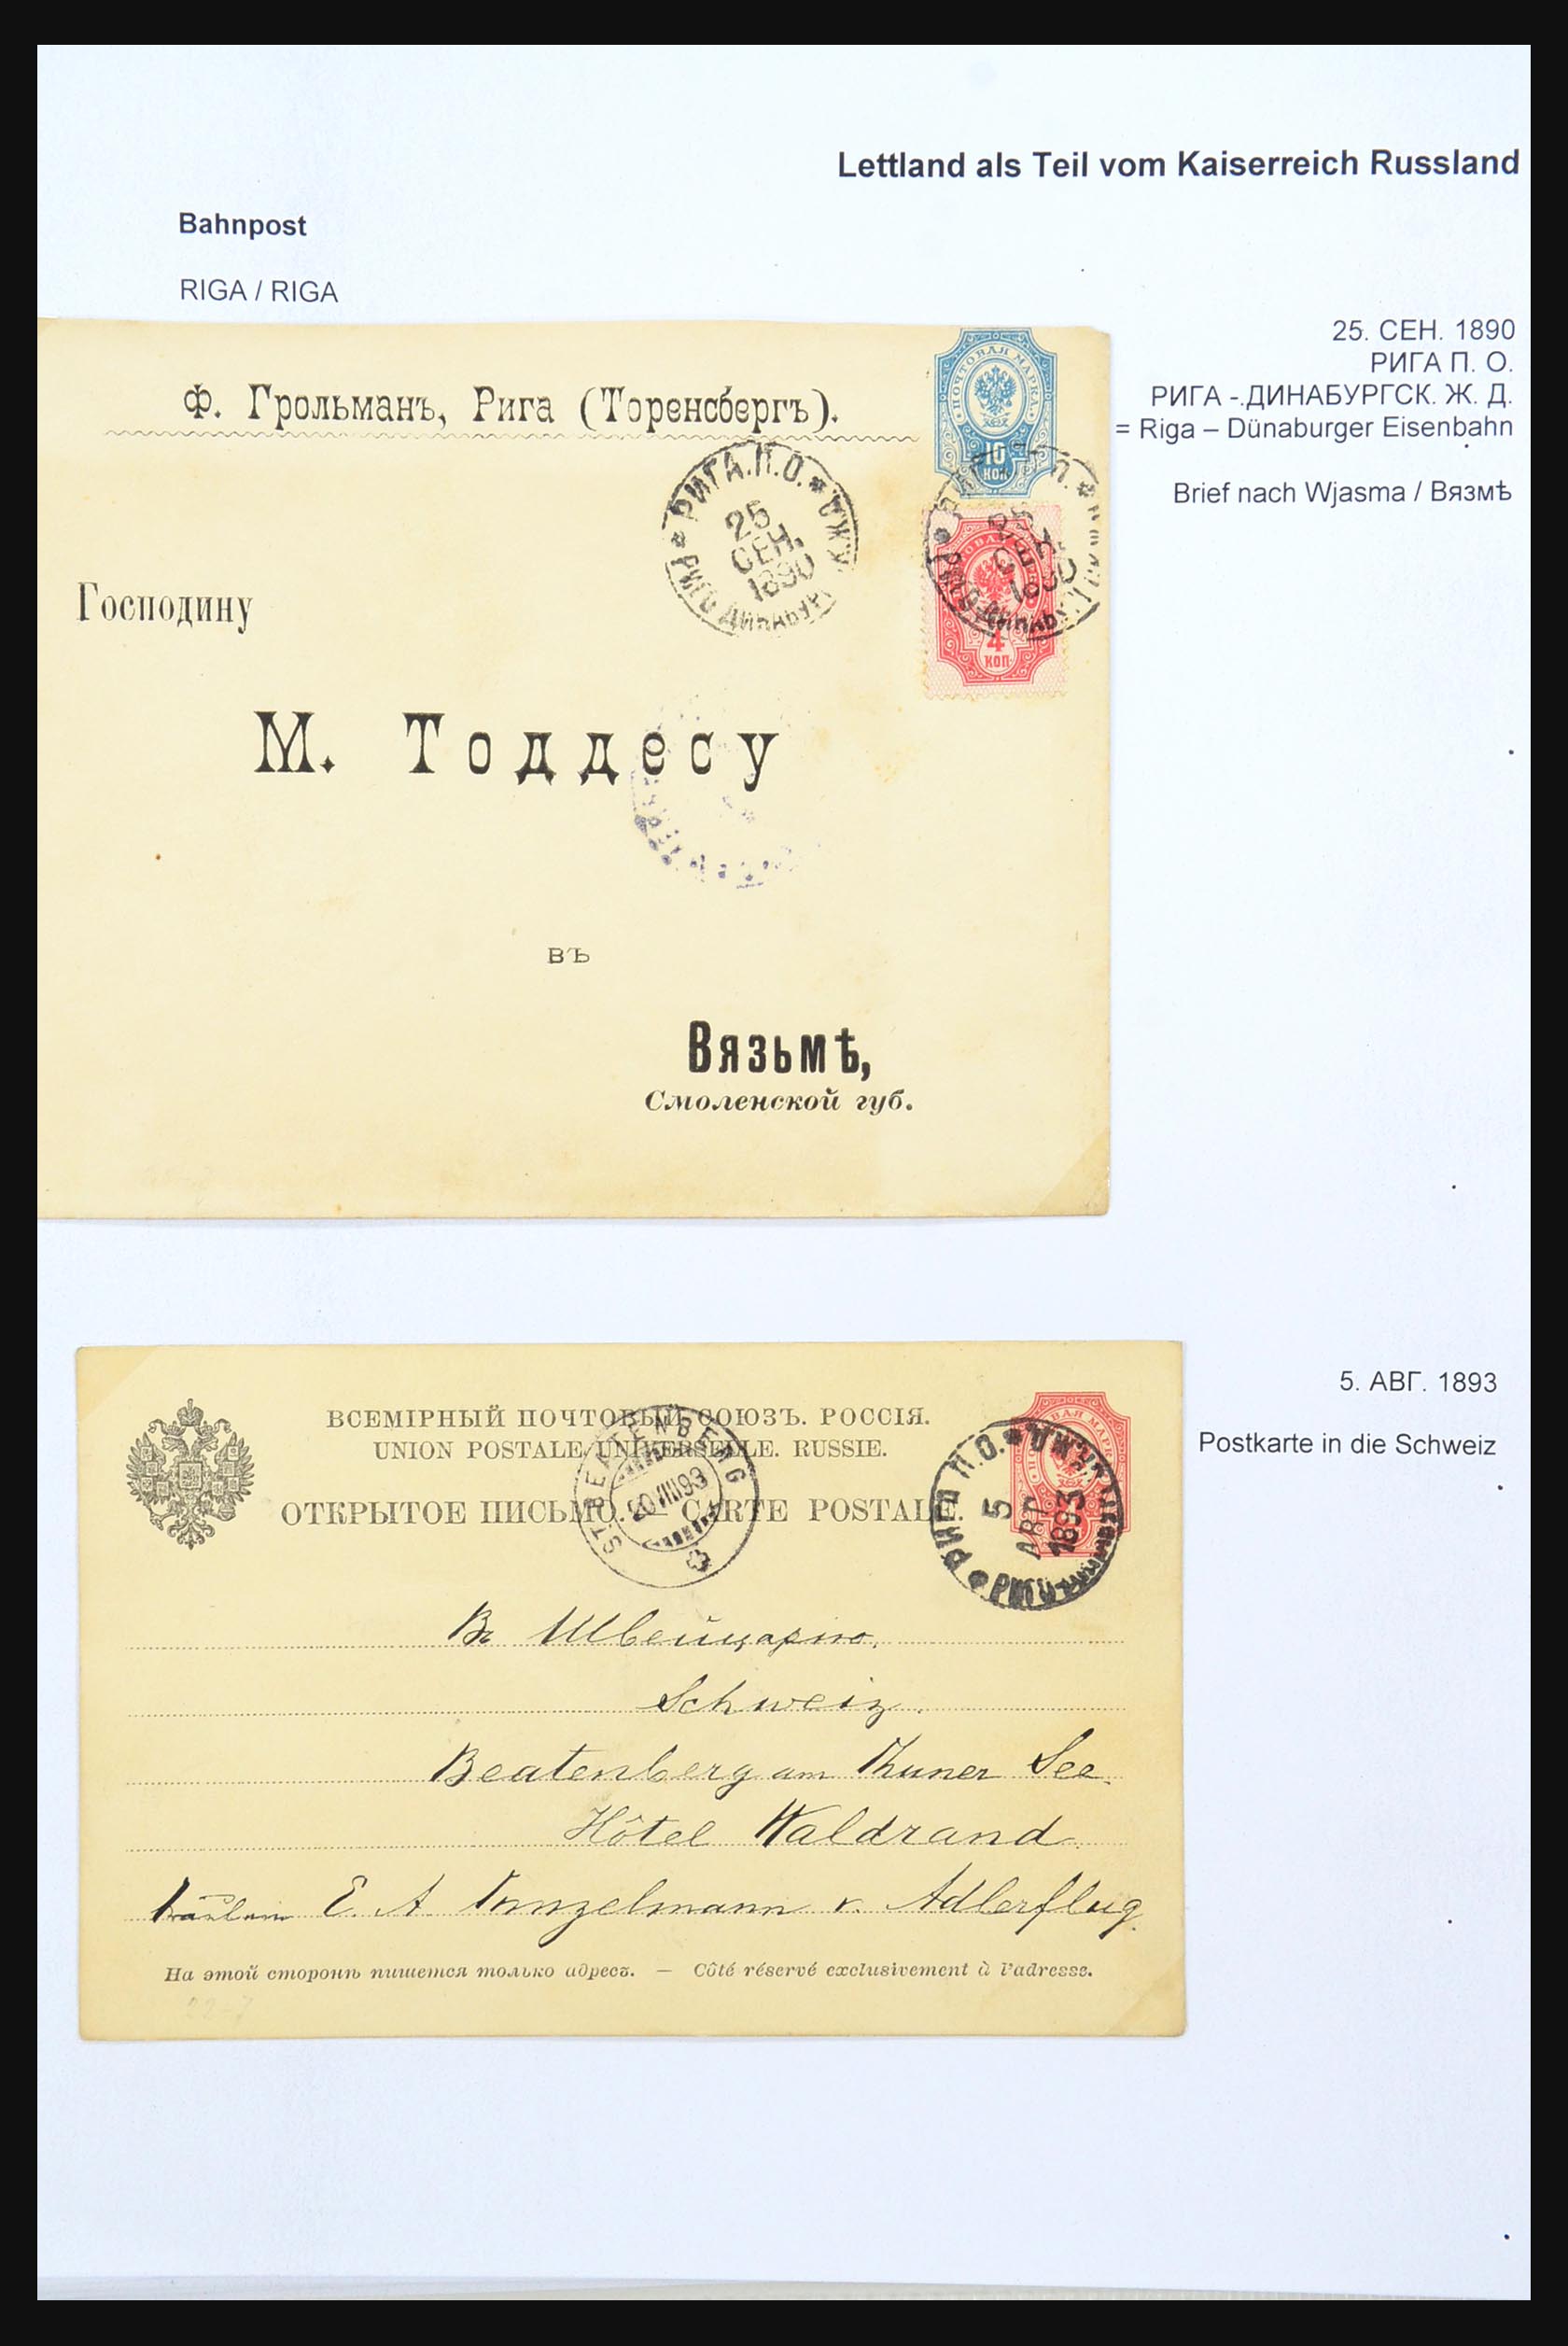 31305 067 - 31305 Latvia as part of Russia 1817-1918.